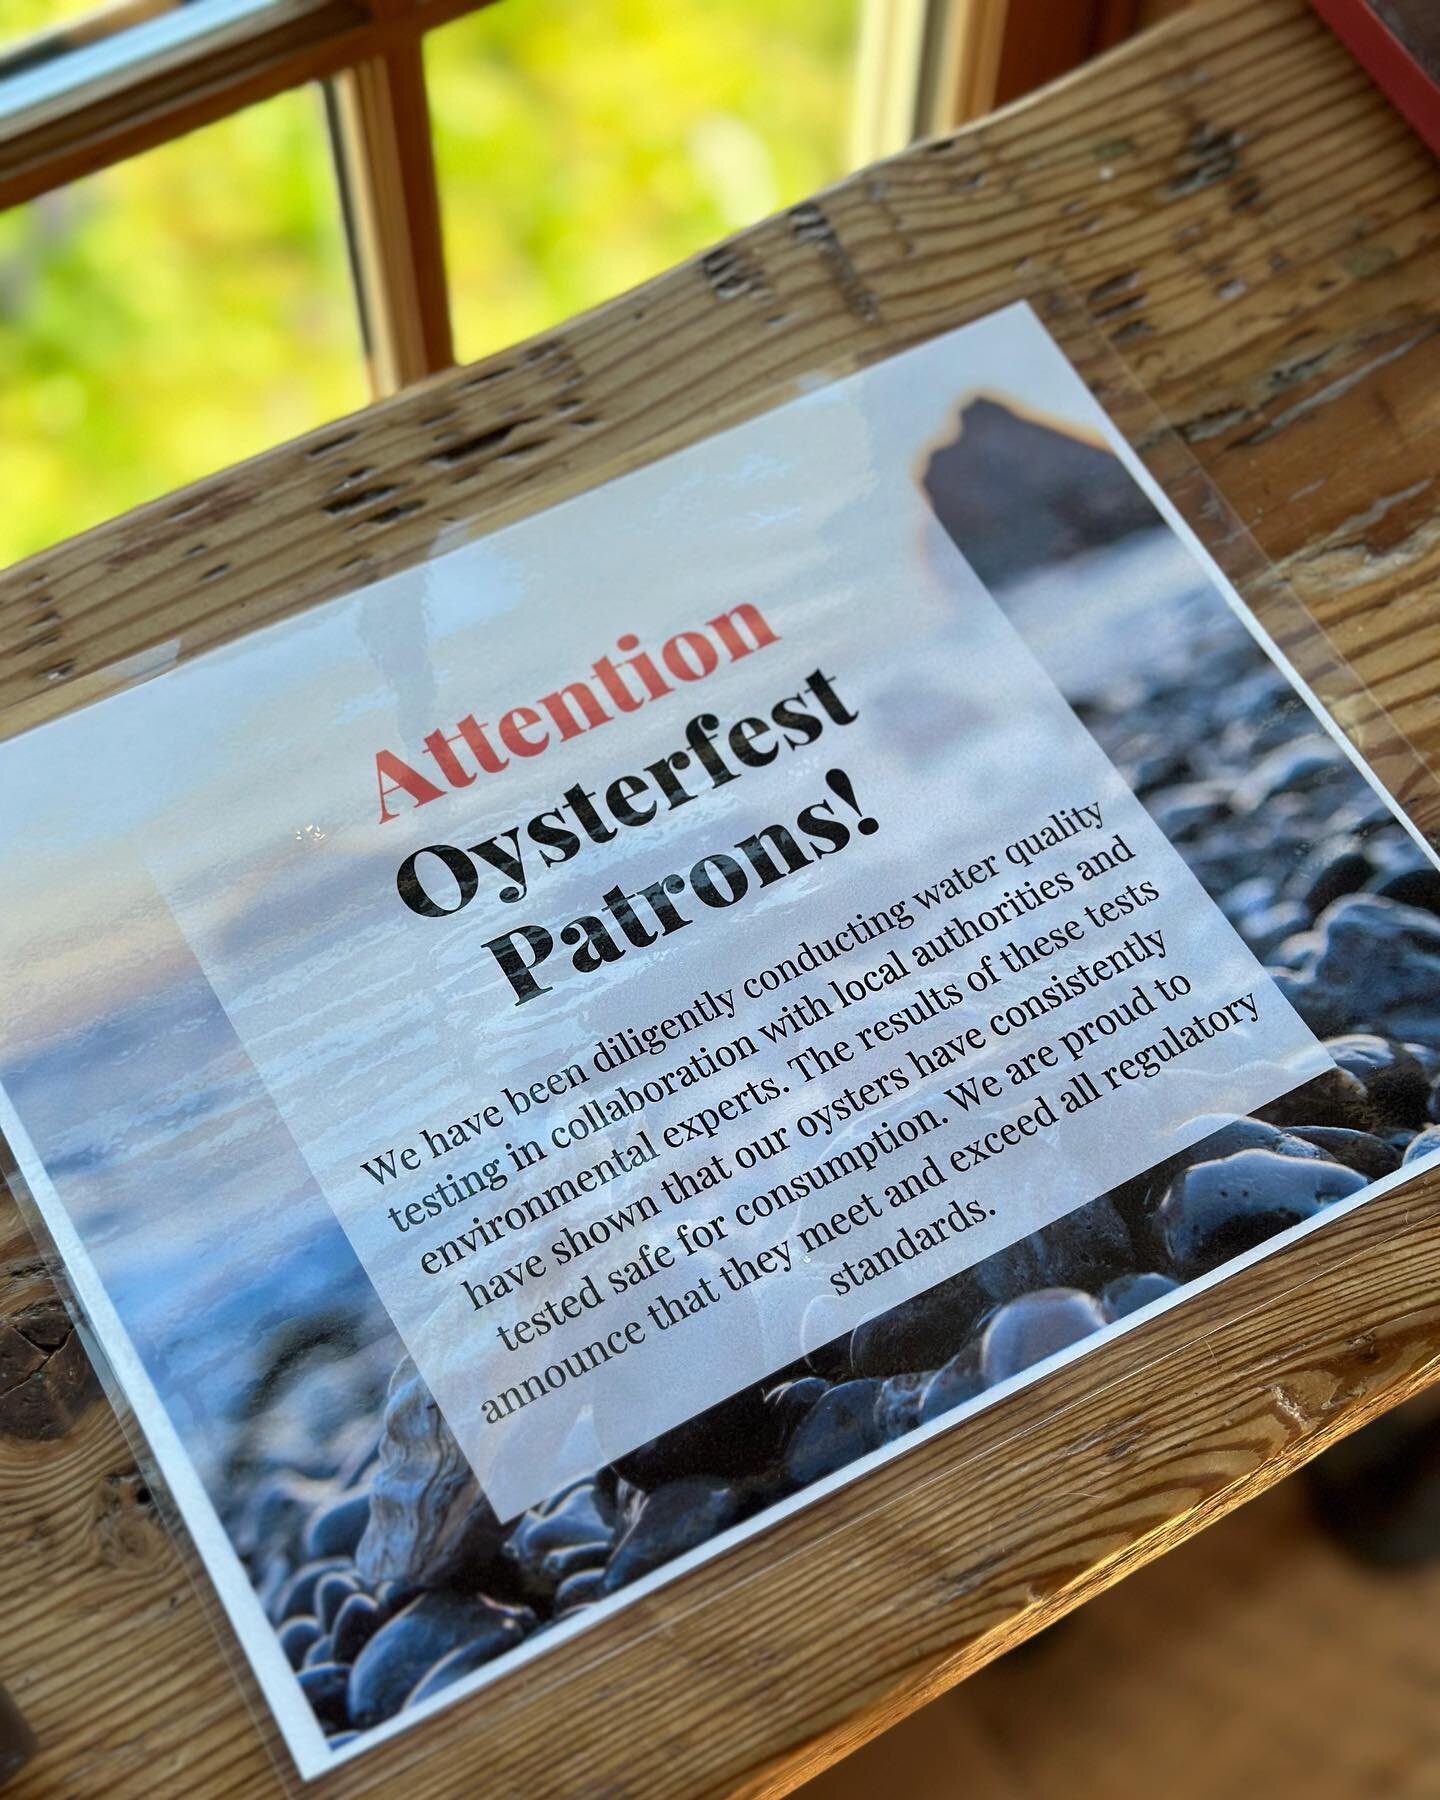 Our oysters meet and exceed all regulatory standards! Safe to enjoy. 🌞